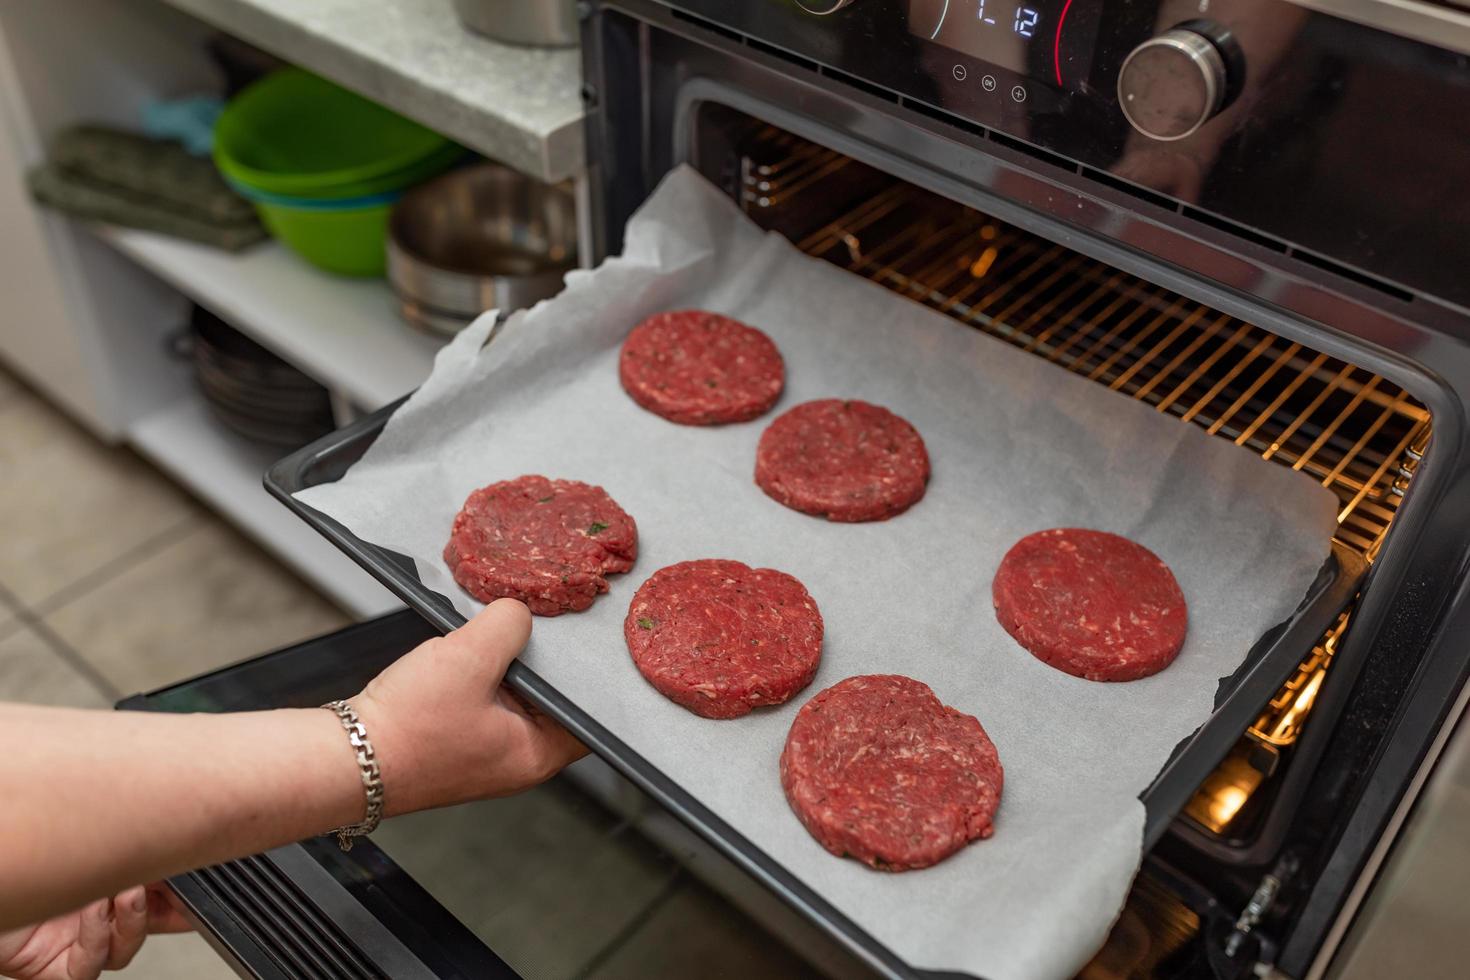 Putting hamburgers in the oven photo